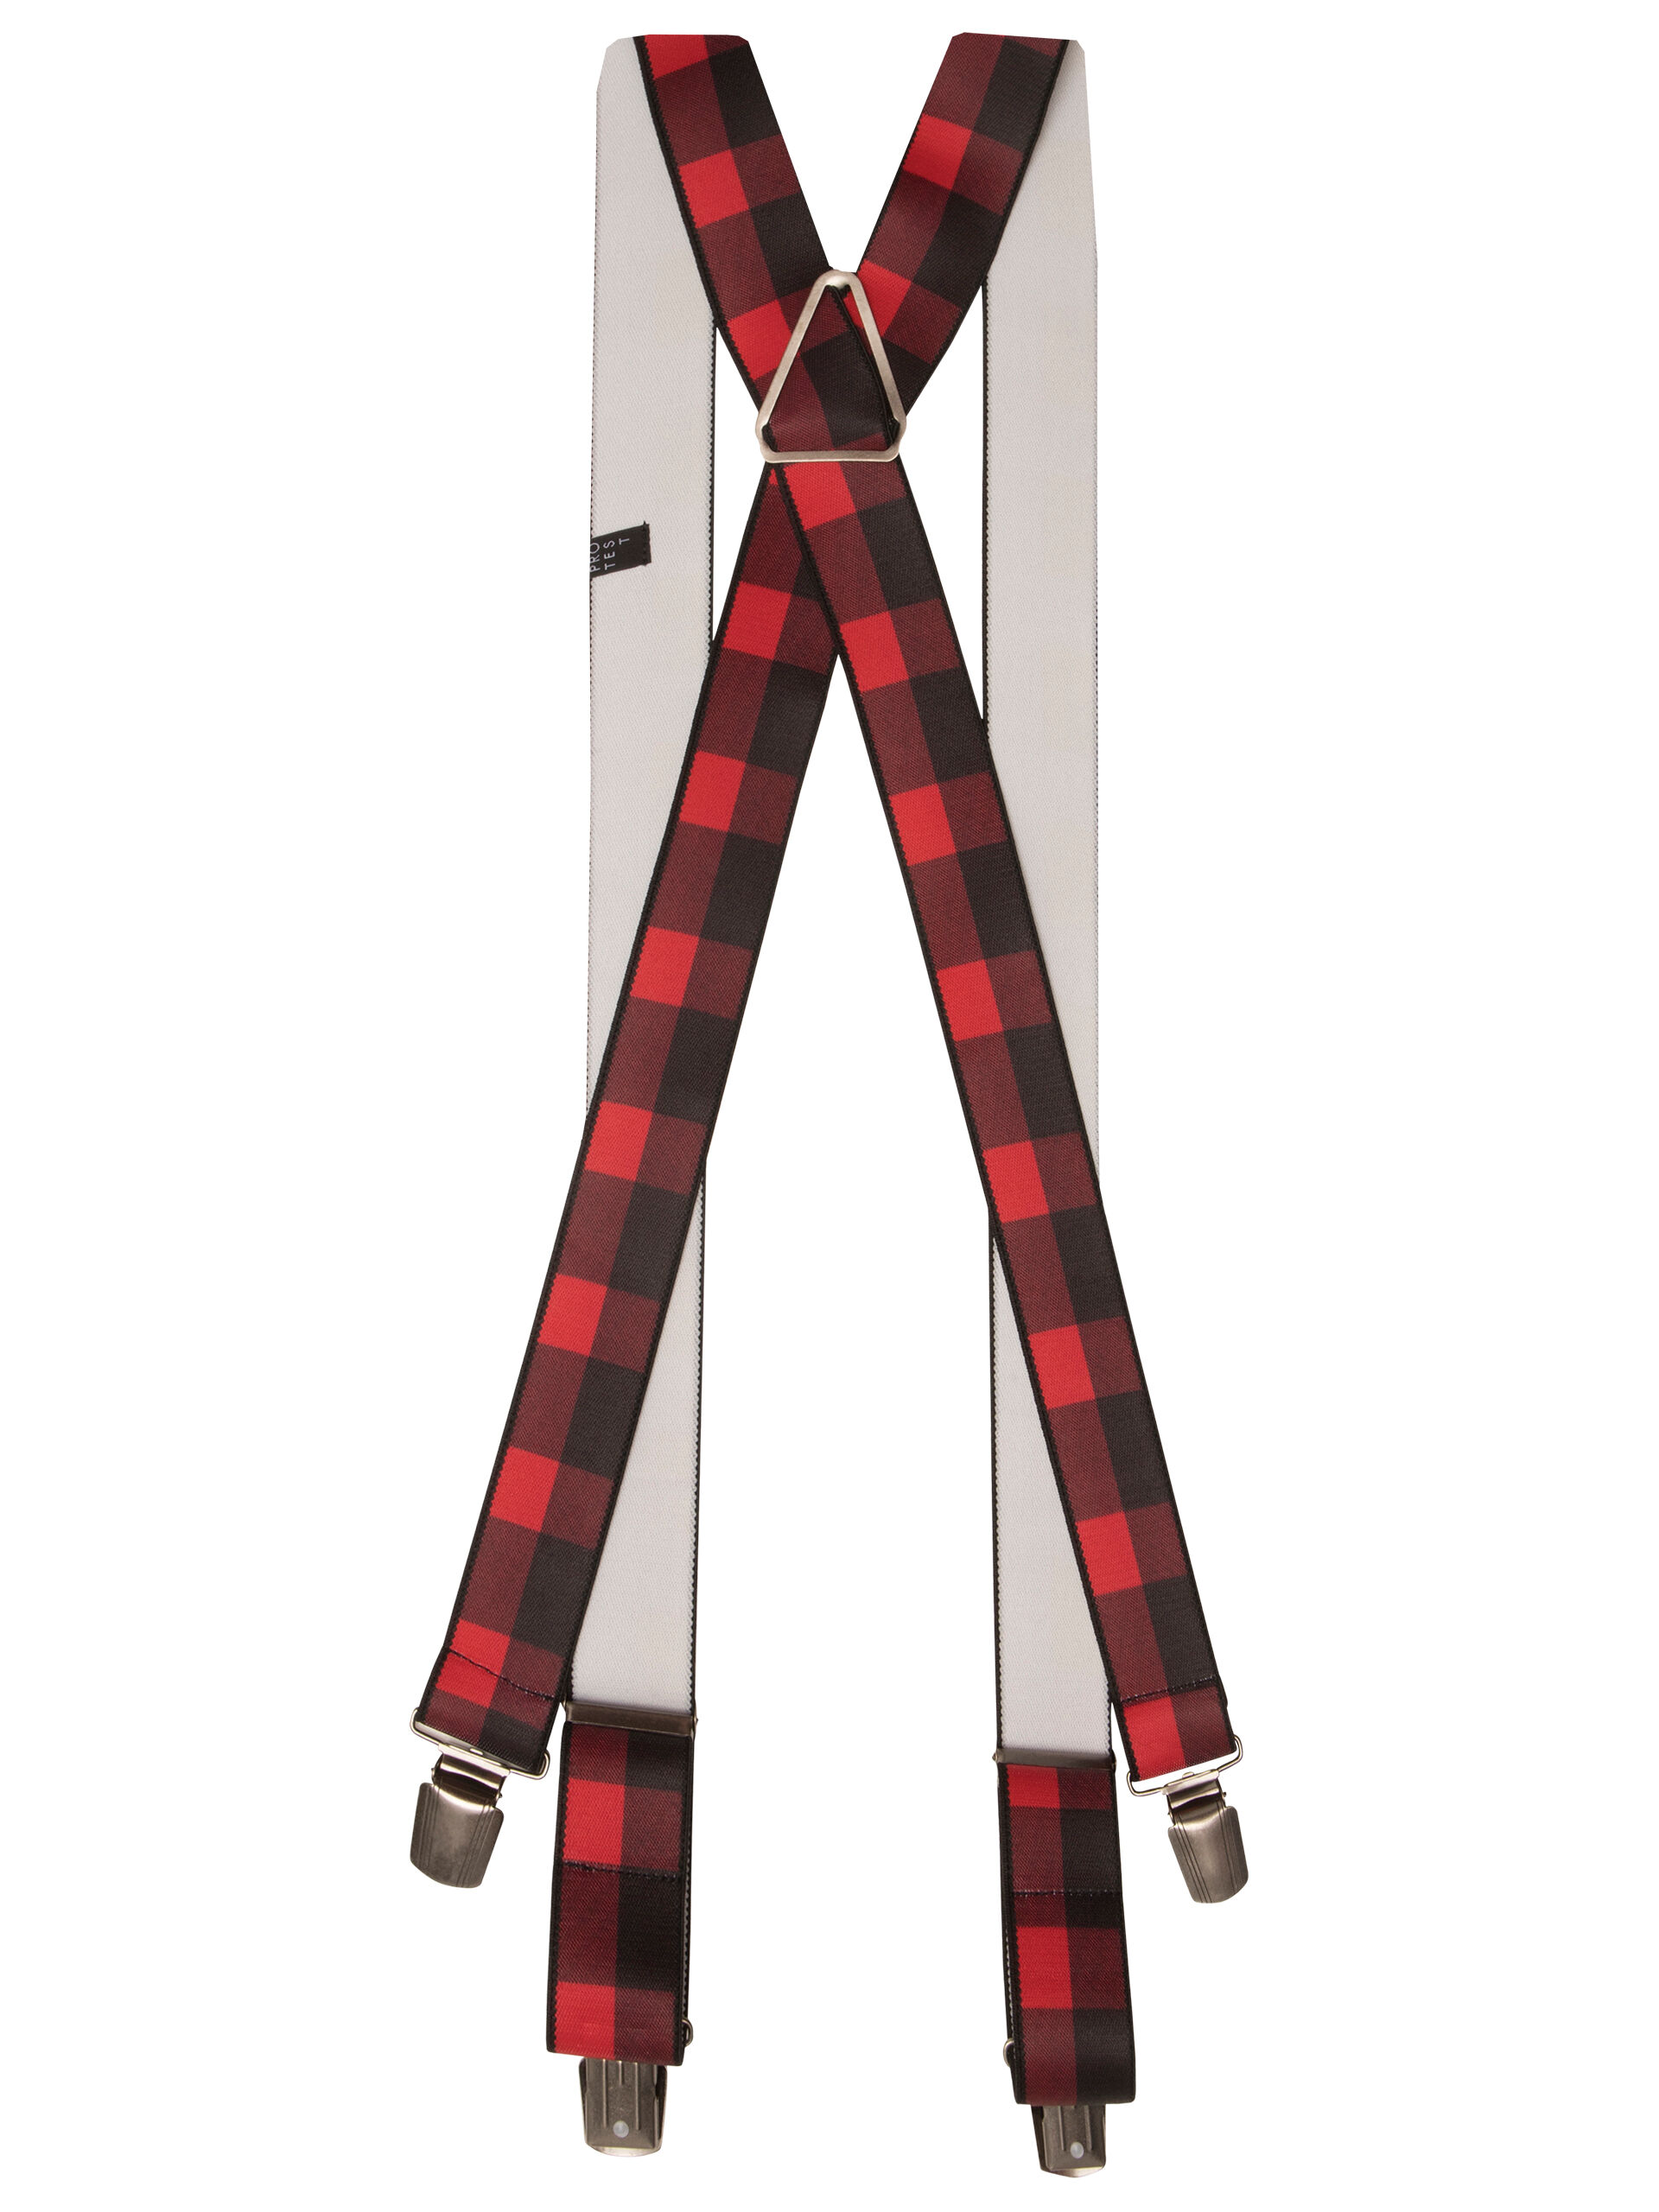 Protest Outwelby - Suspenders - Men's